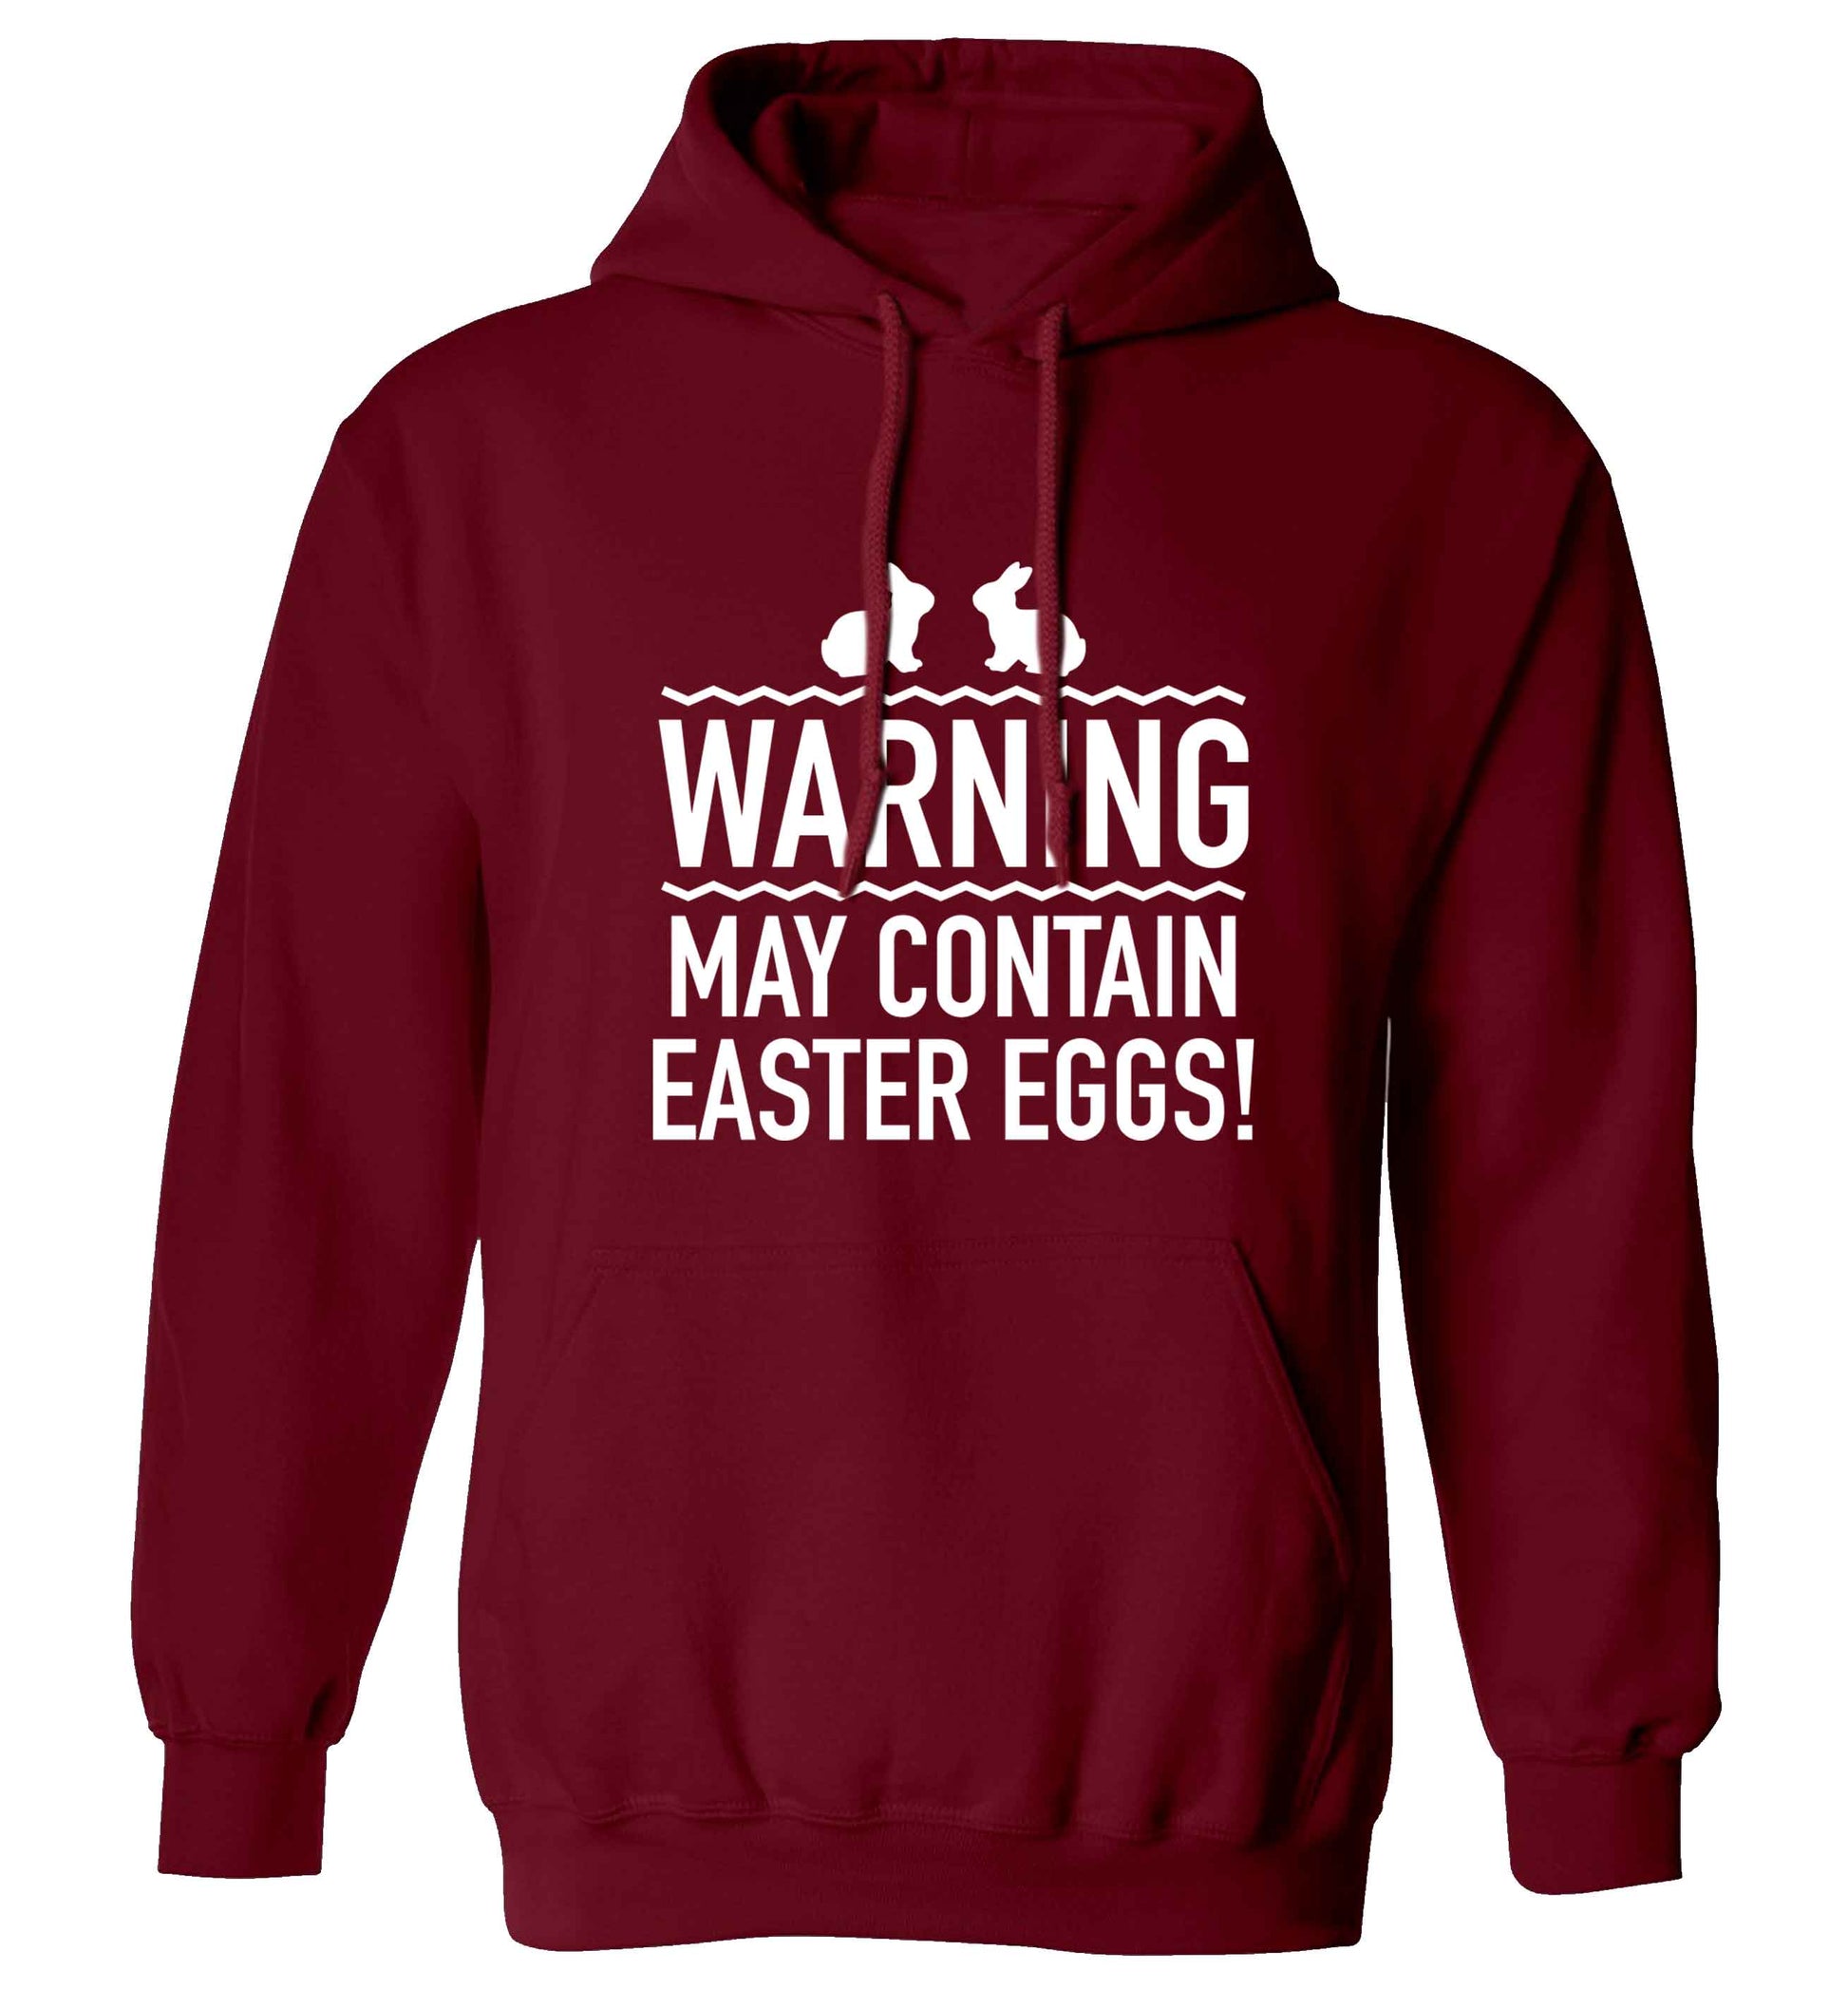 Warning may contain Easter eggs adults unisex maroon hoodie 2XL